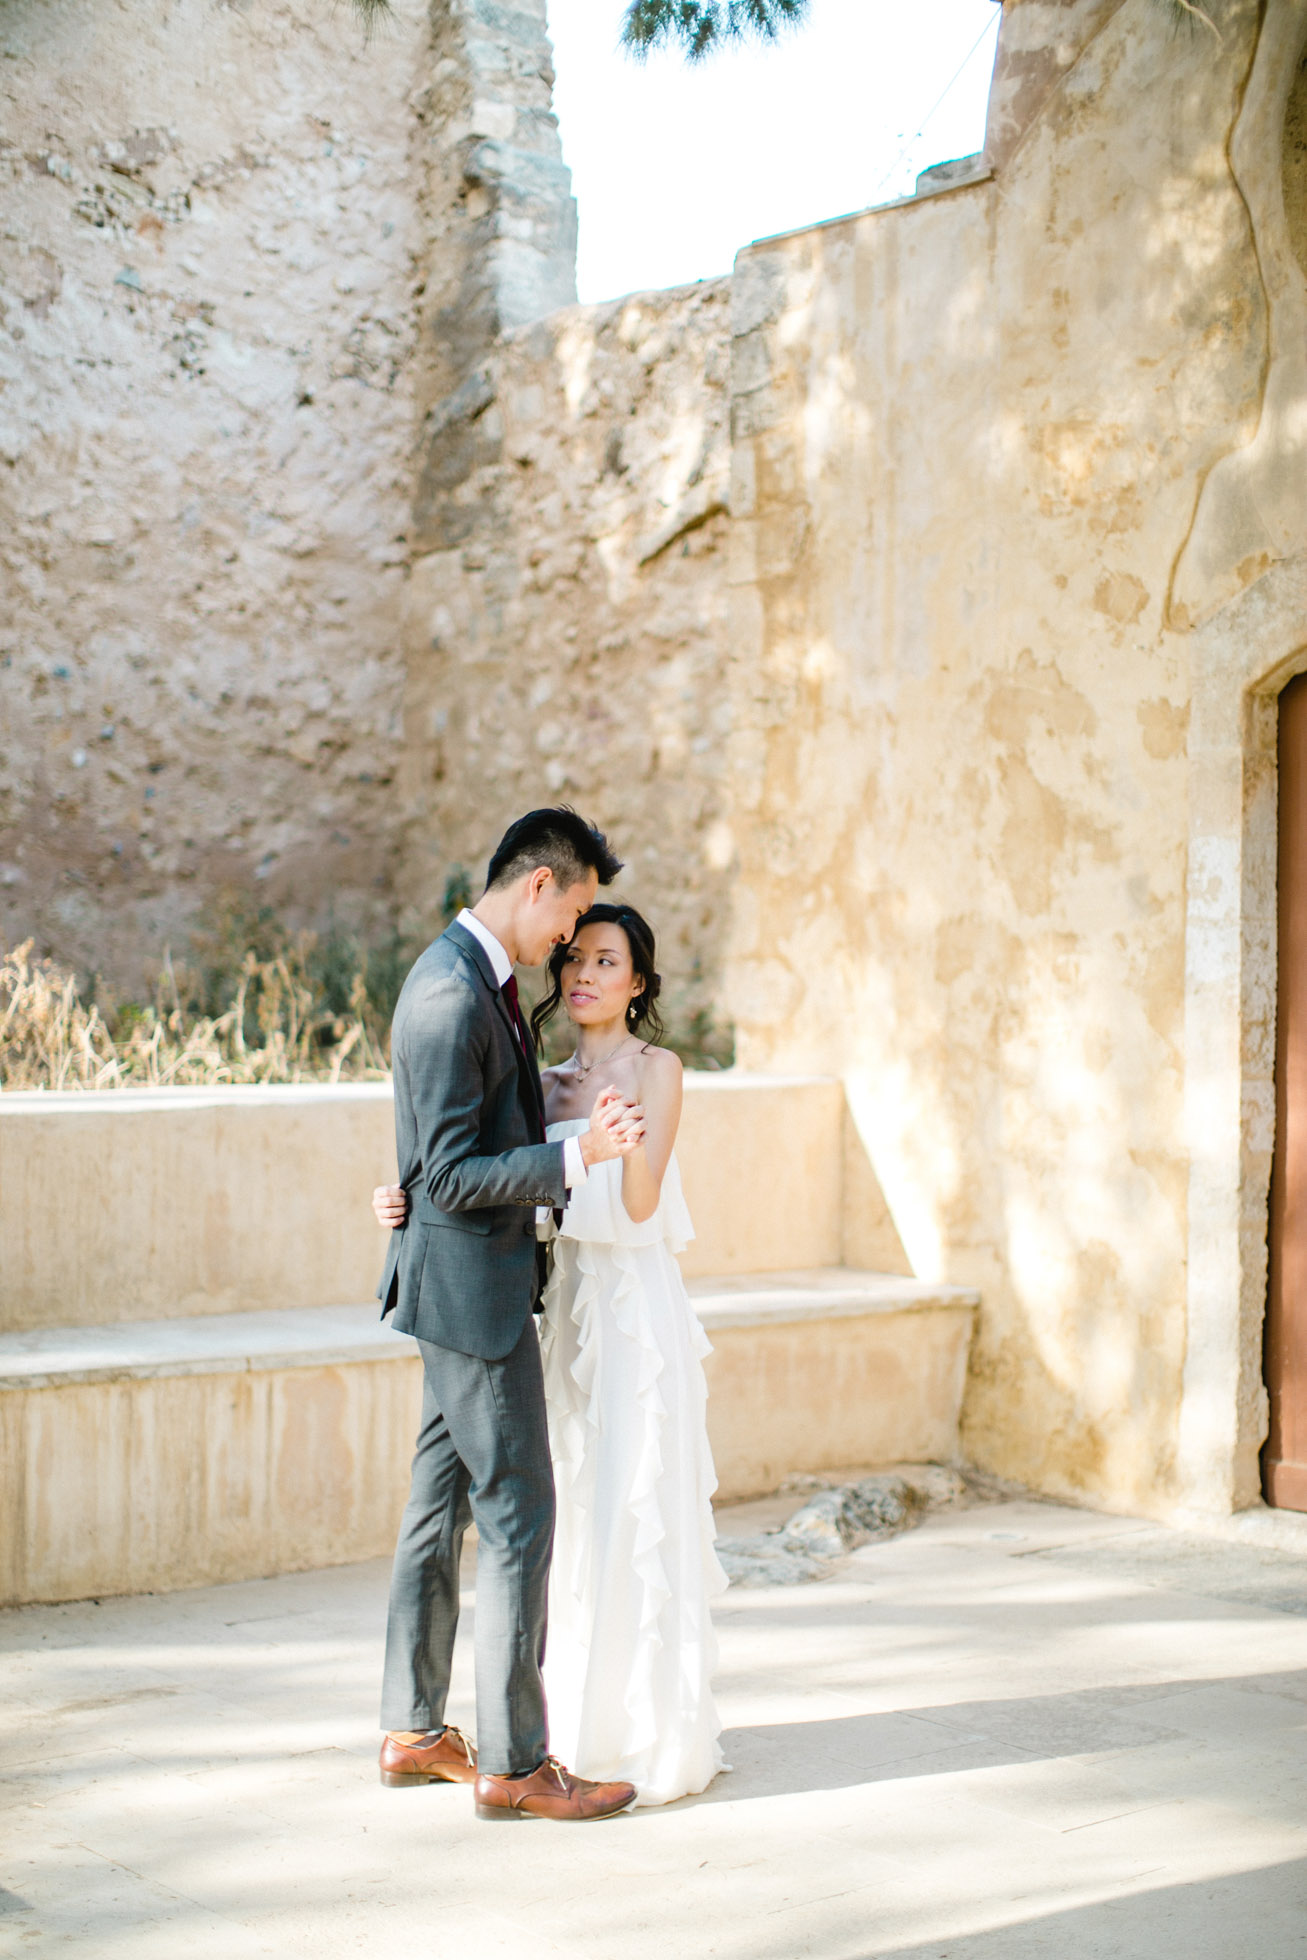 Elegant Asian couple wearing designer wedding clothing posing for professional photographer team during their wedding day photoshoot in Fortezza of Rethymno town, Crete.